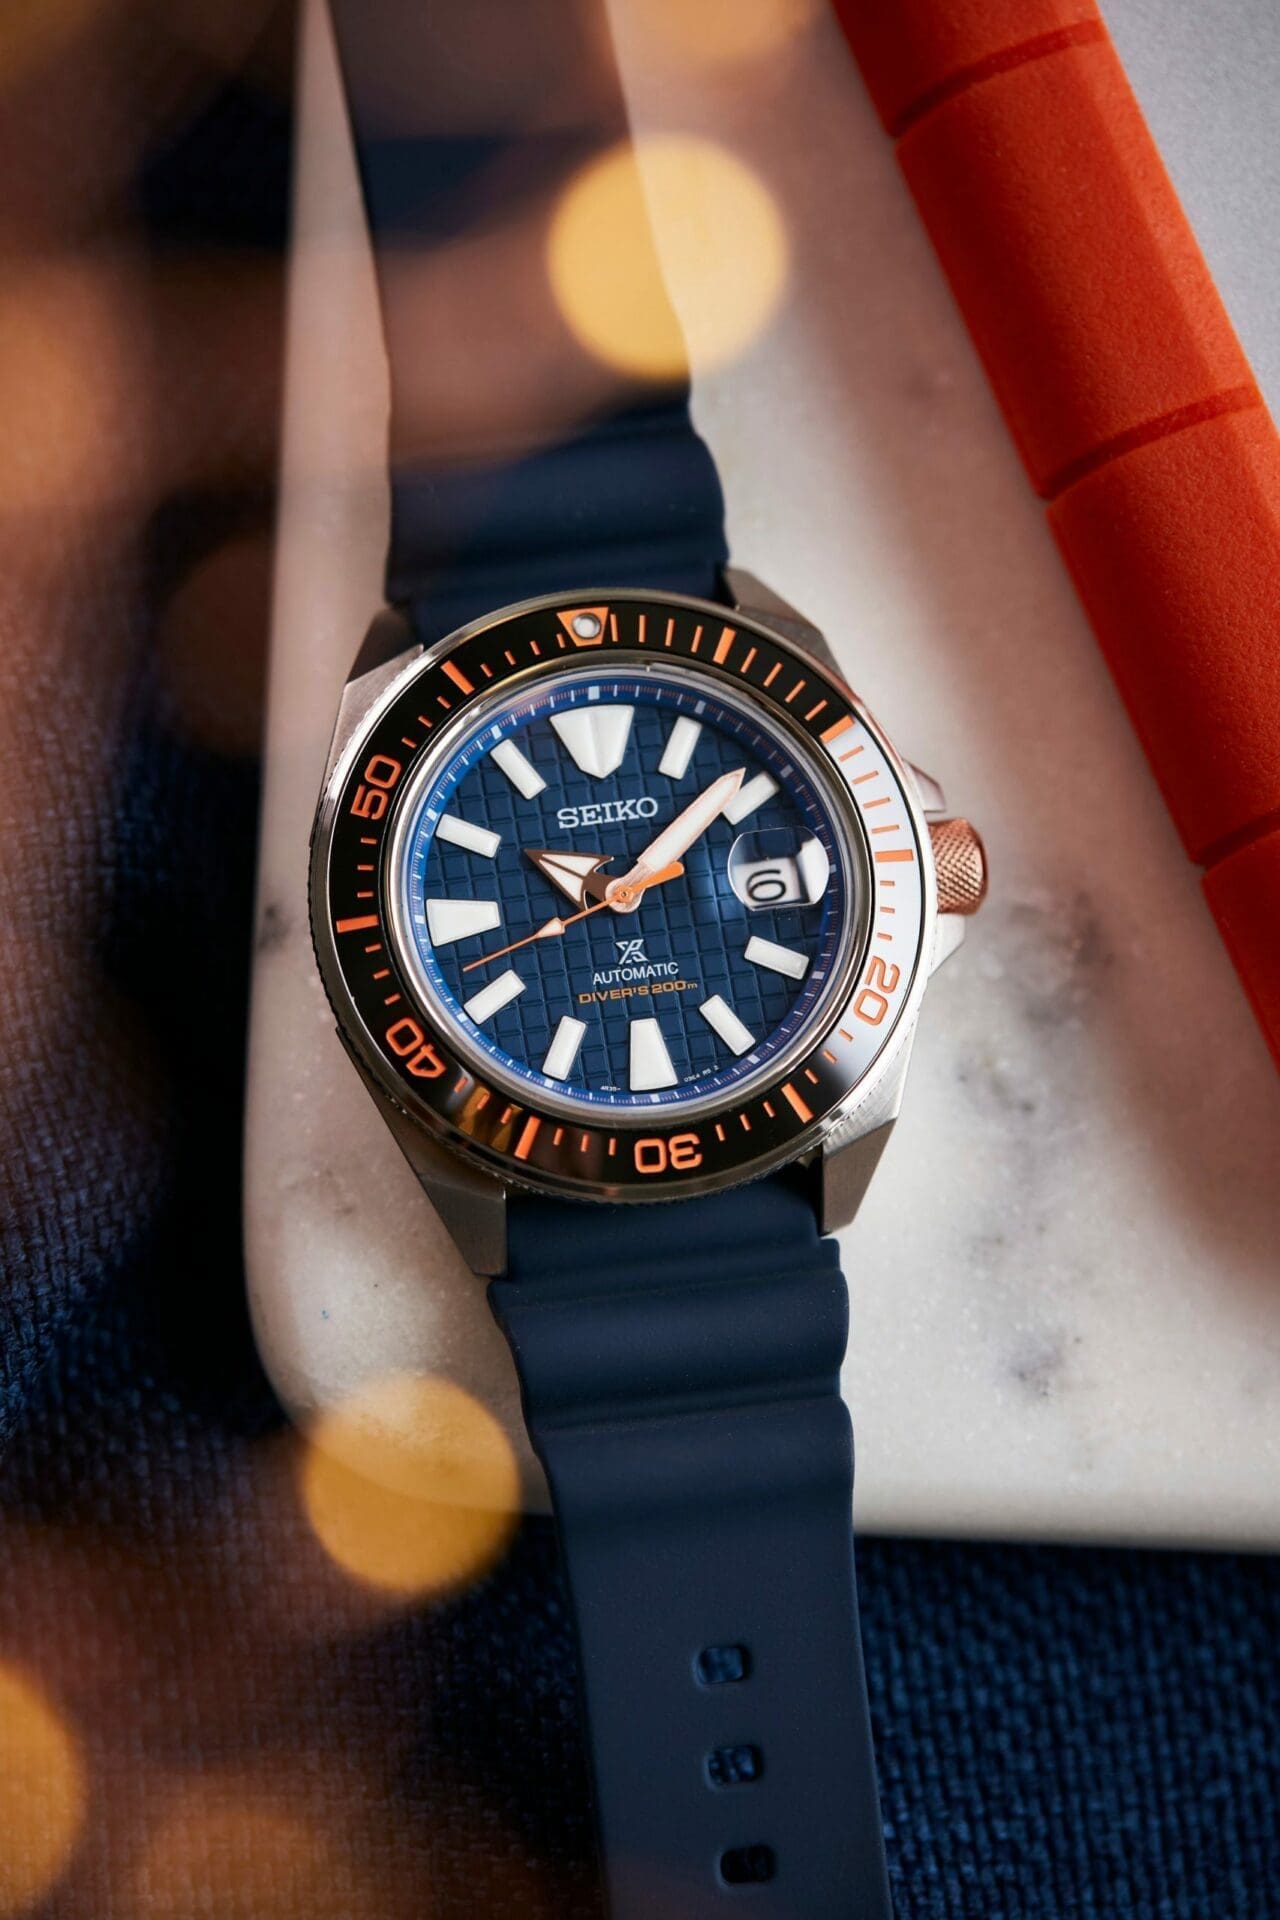 HANDS ON: The Seiko Prospex Samurai Save The Ocean, Asia Special Edition SRPH43